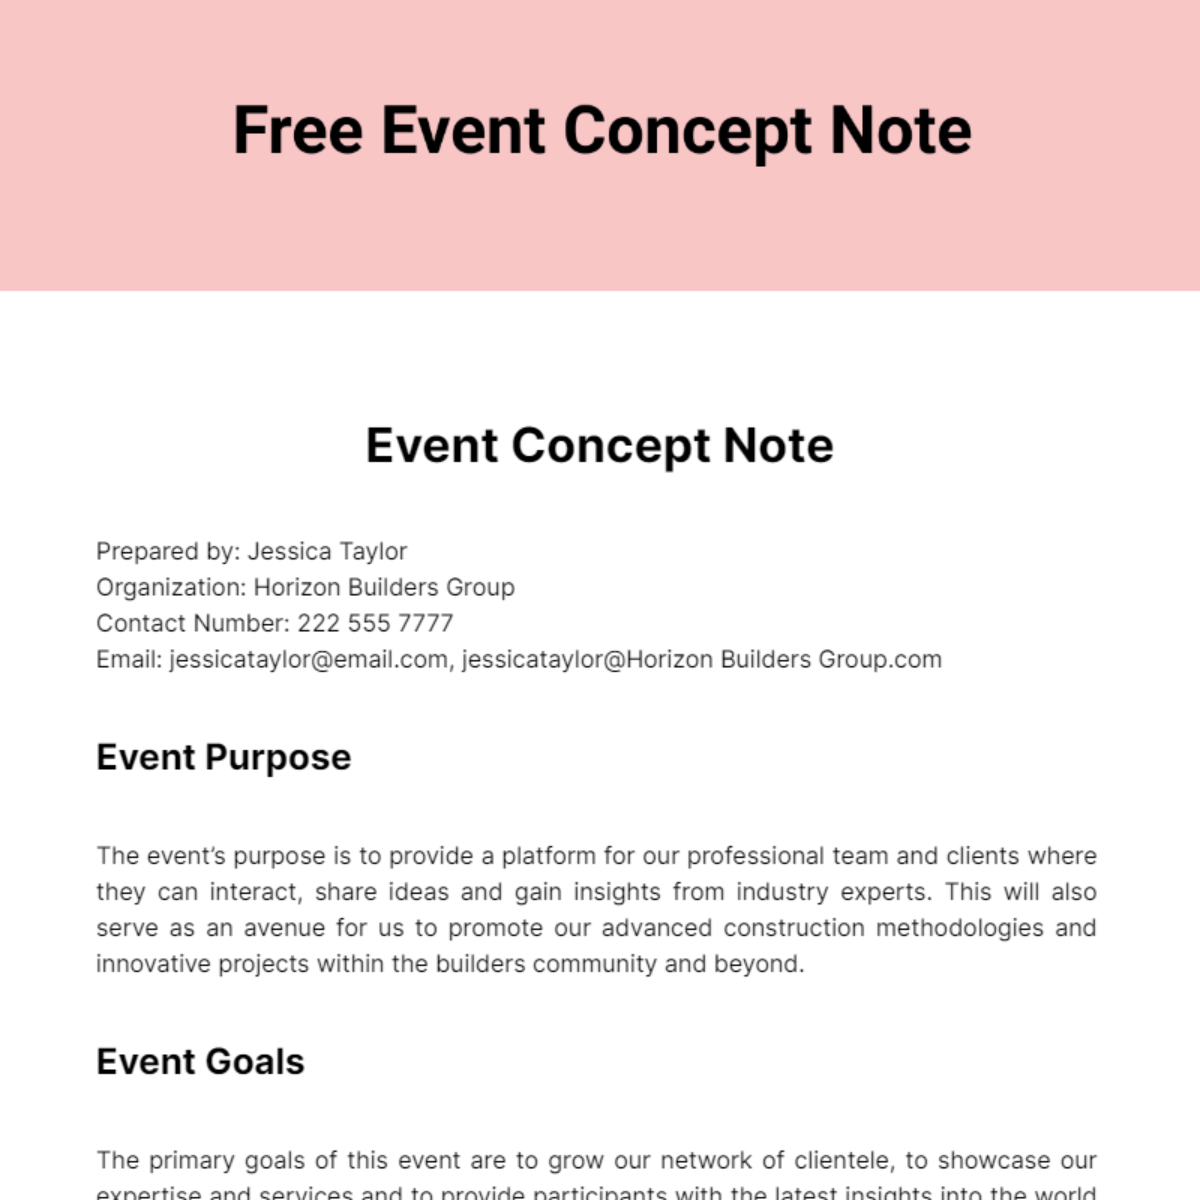 Free Event Concept Note Template